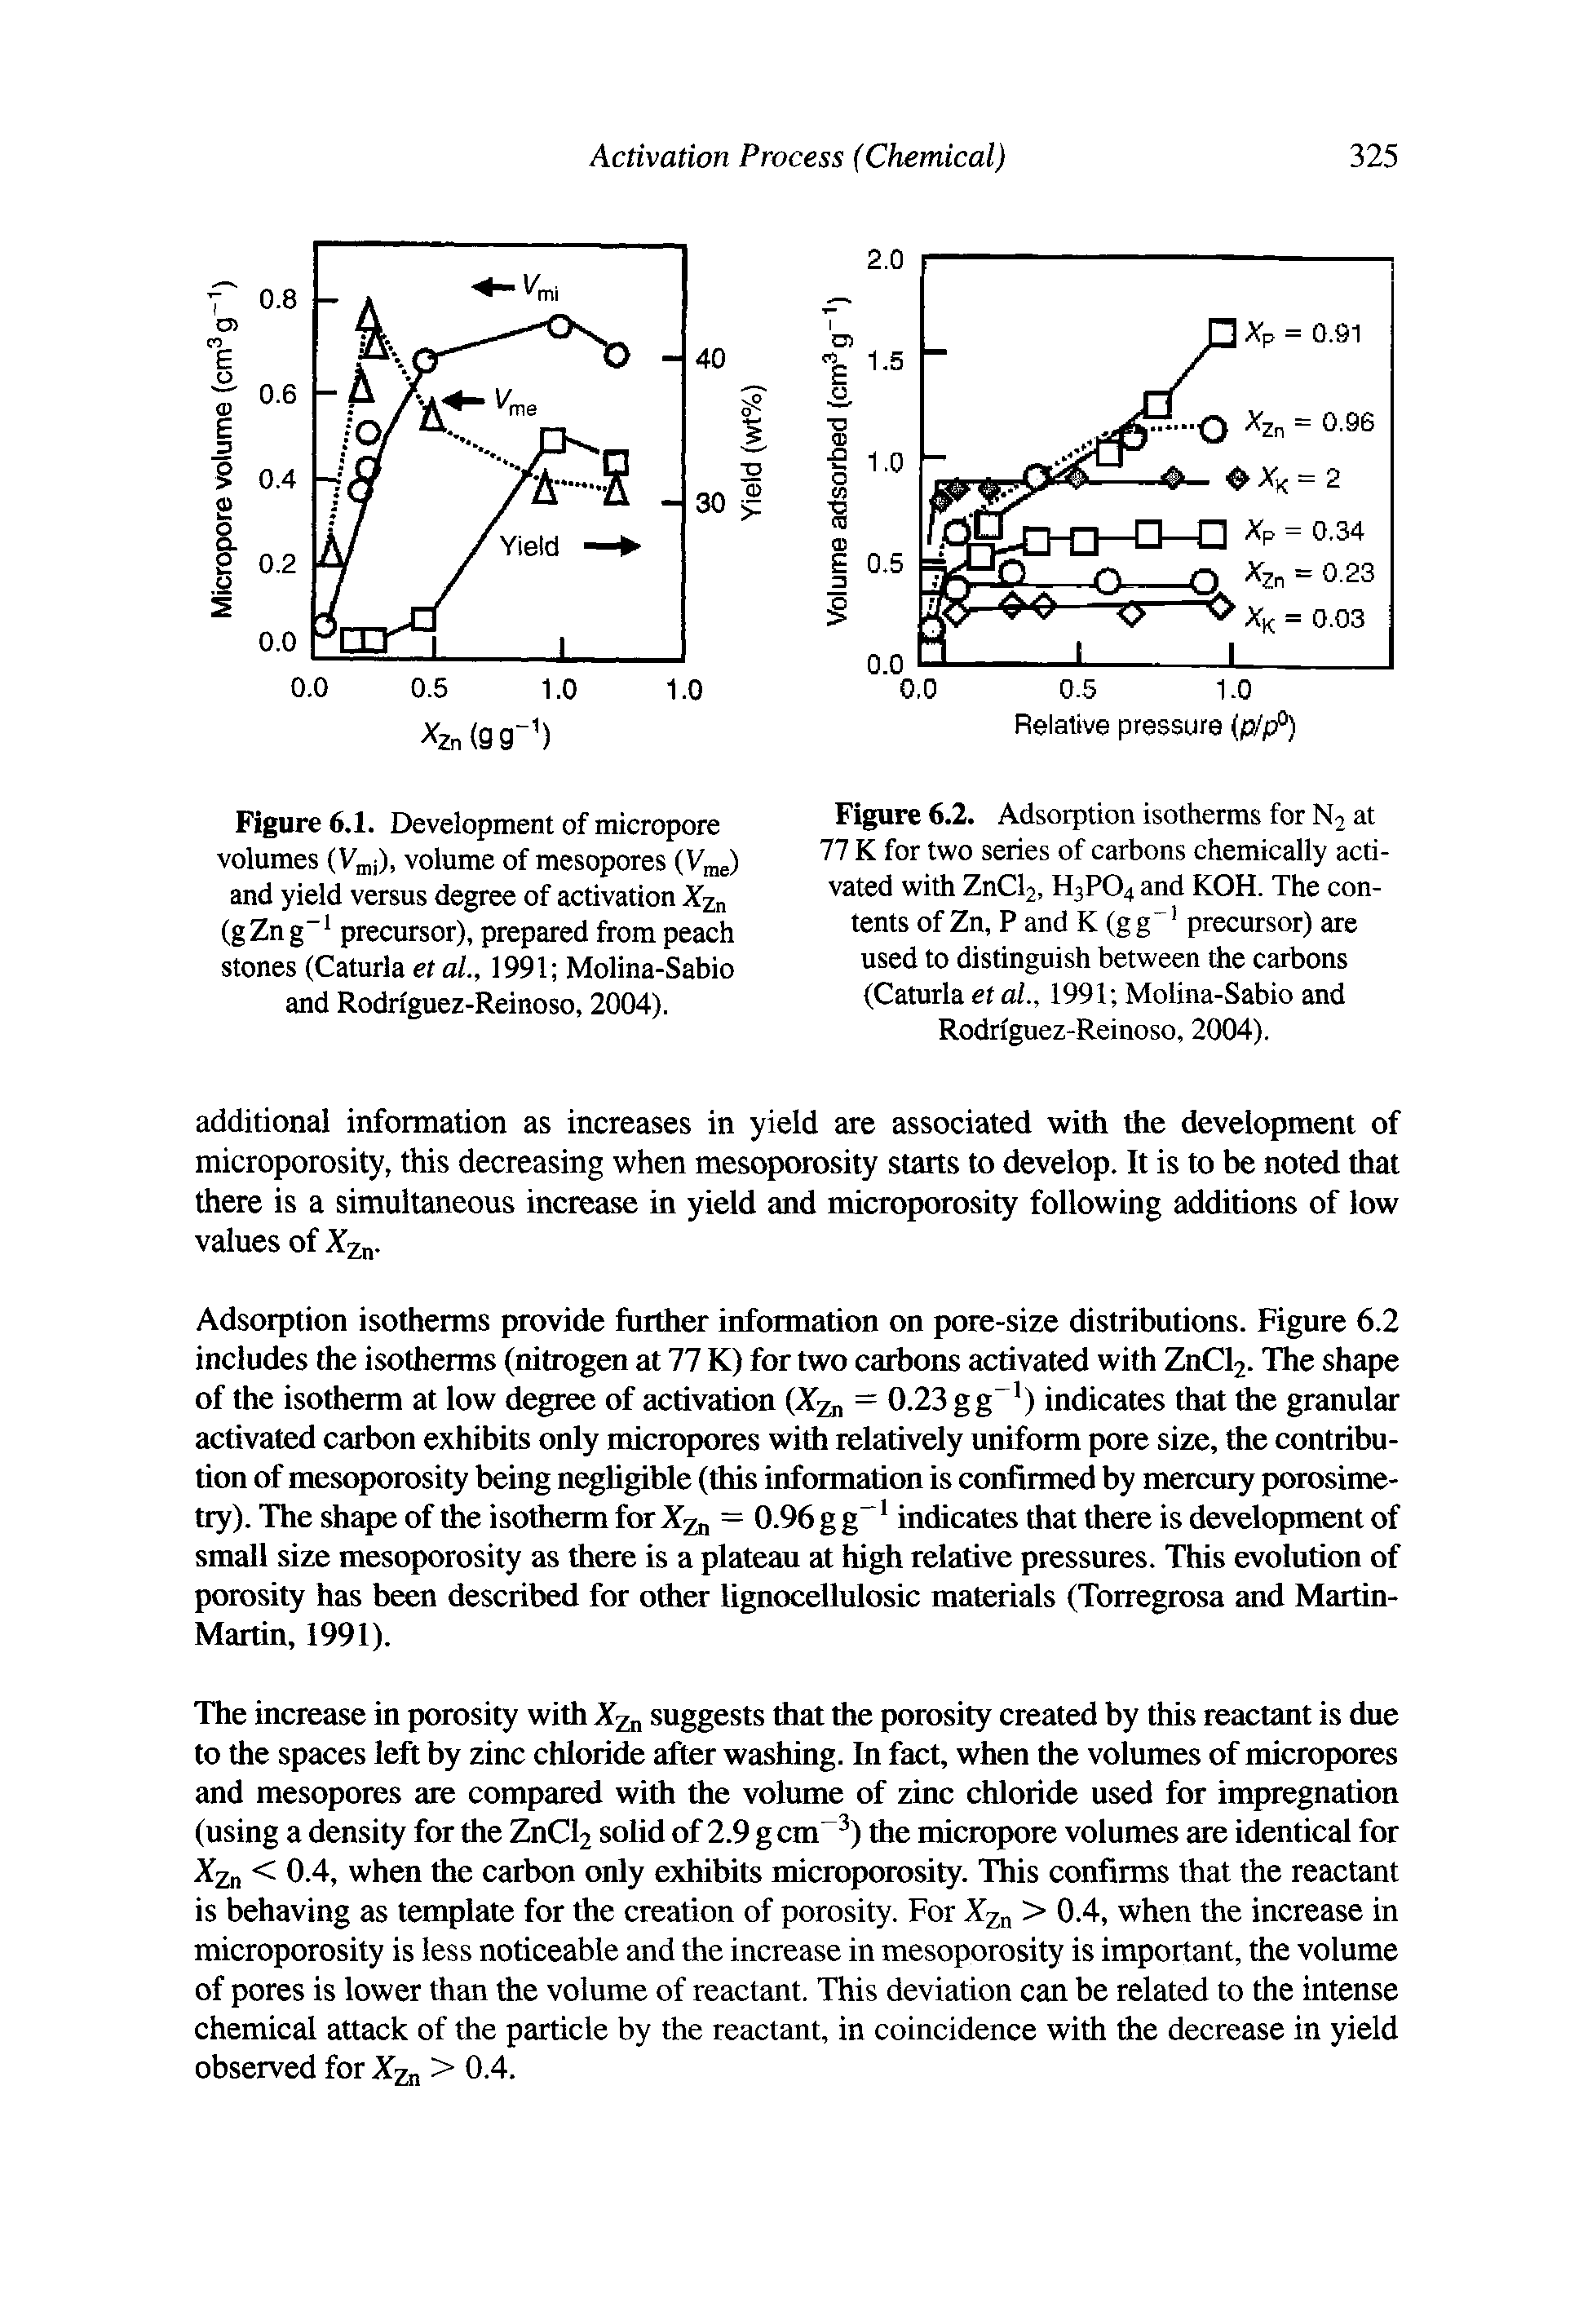 Figure 6.2. Adsorption isotherms for N2 at 77 K for two series of carbons chemically activated with ZnClj, H3PO4 and KOH. The contents of Zn, P and K (gg precursor) are used to distinguish between die carbons Caturla et al., 1991 Molina-Sabio and Rodriguez-Reinoso, 2004).